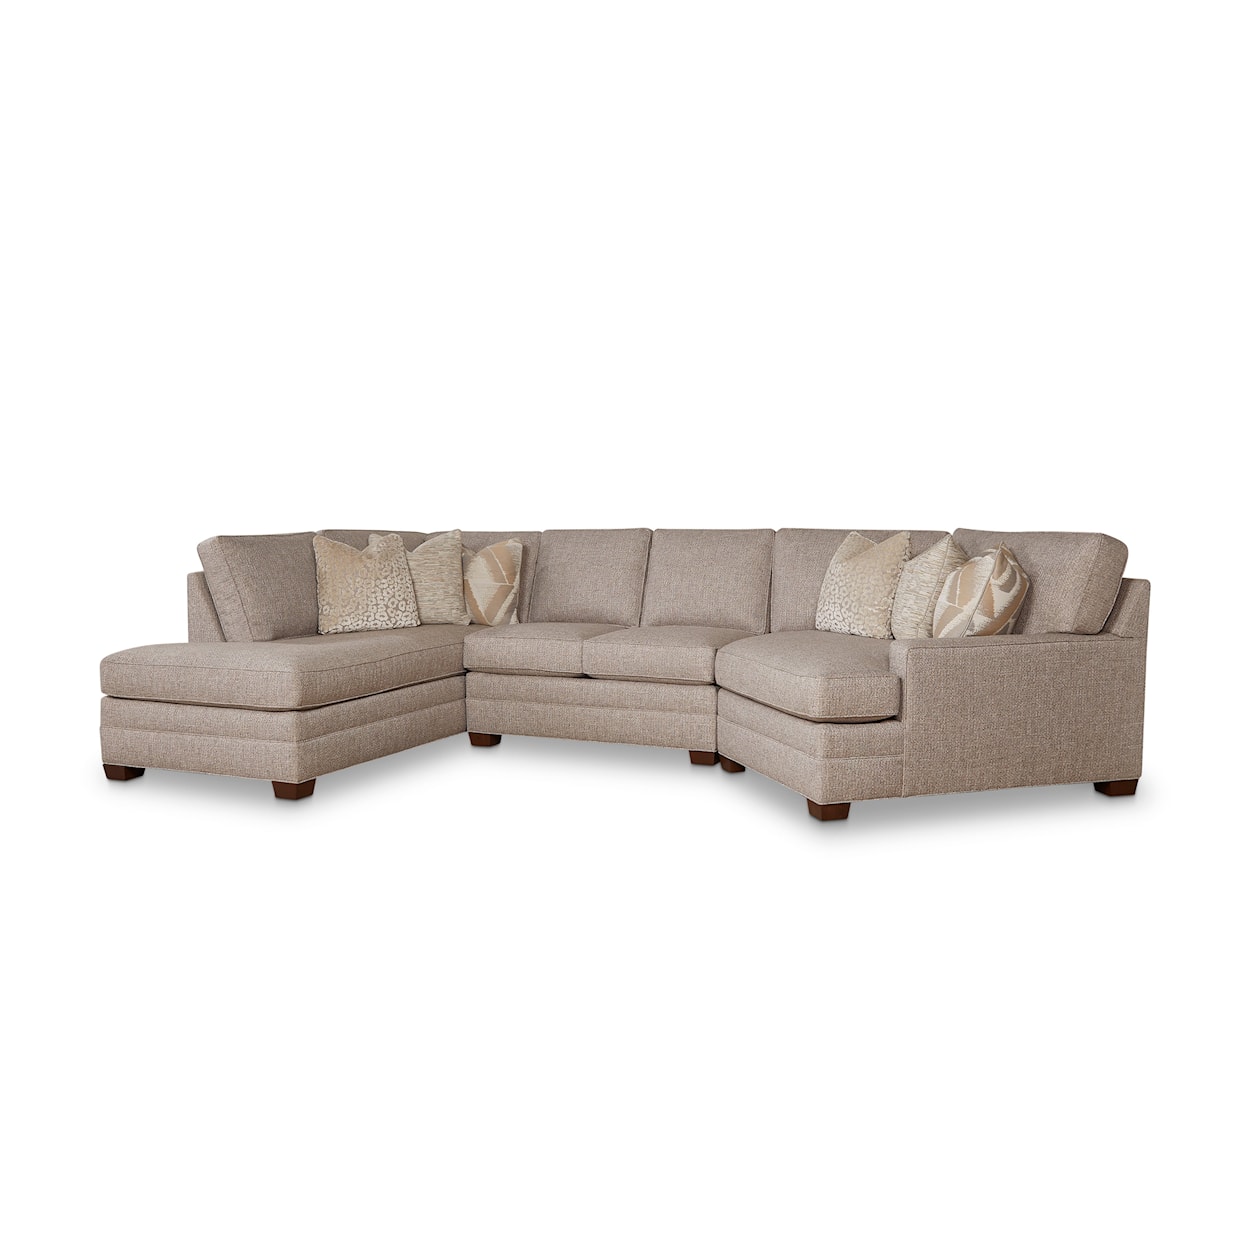 Huntington House 2062 Collection 4-Seat Sectional Sofa with Cuddler Chaise